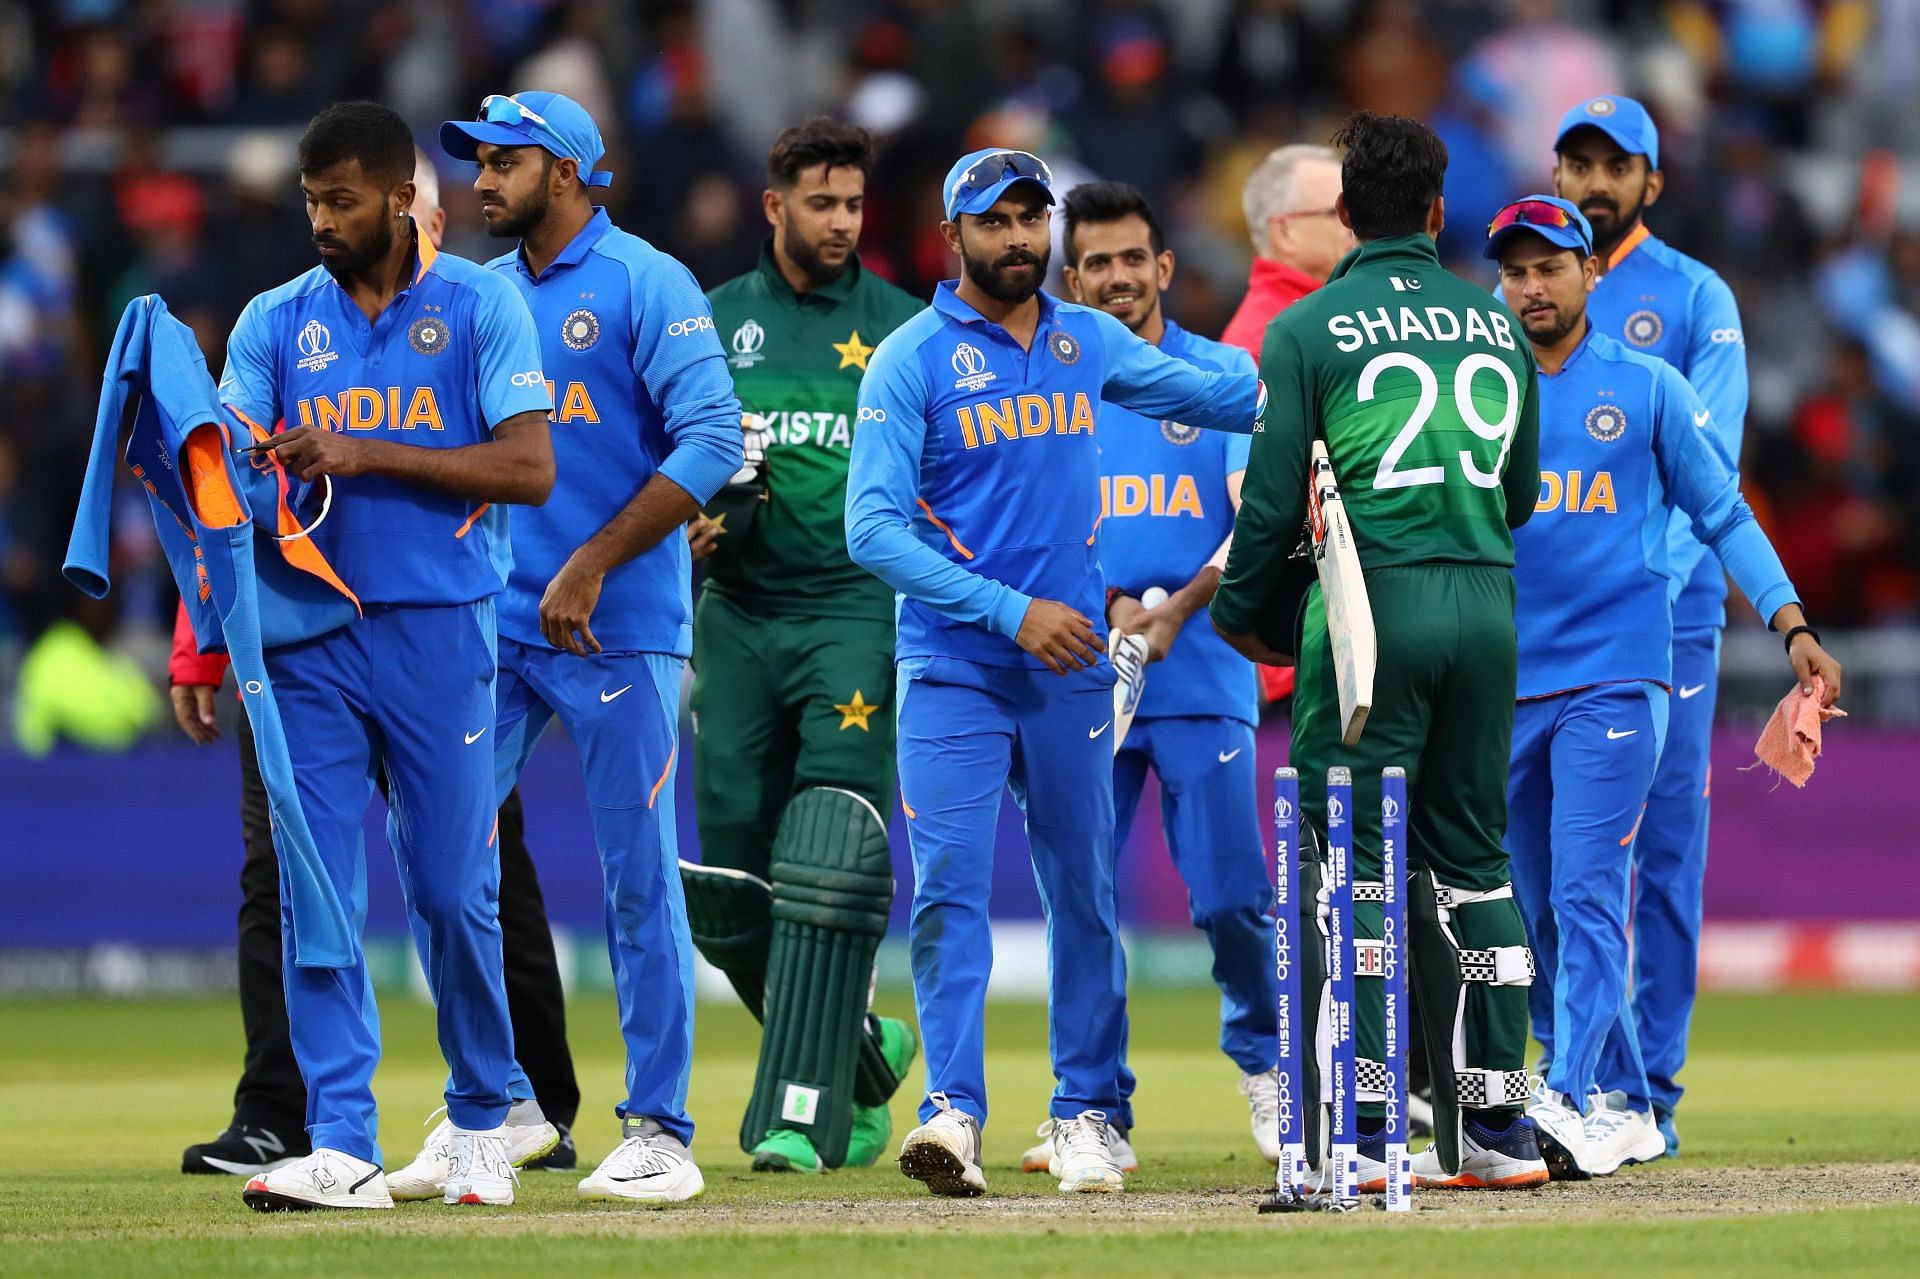 India vs Pakistan: One of the biggest rivalries in cricketing history is back on Sunday!